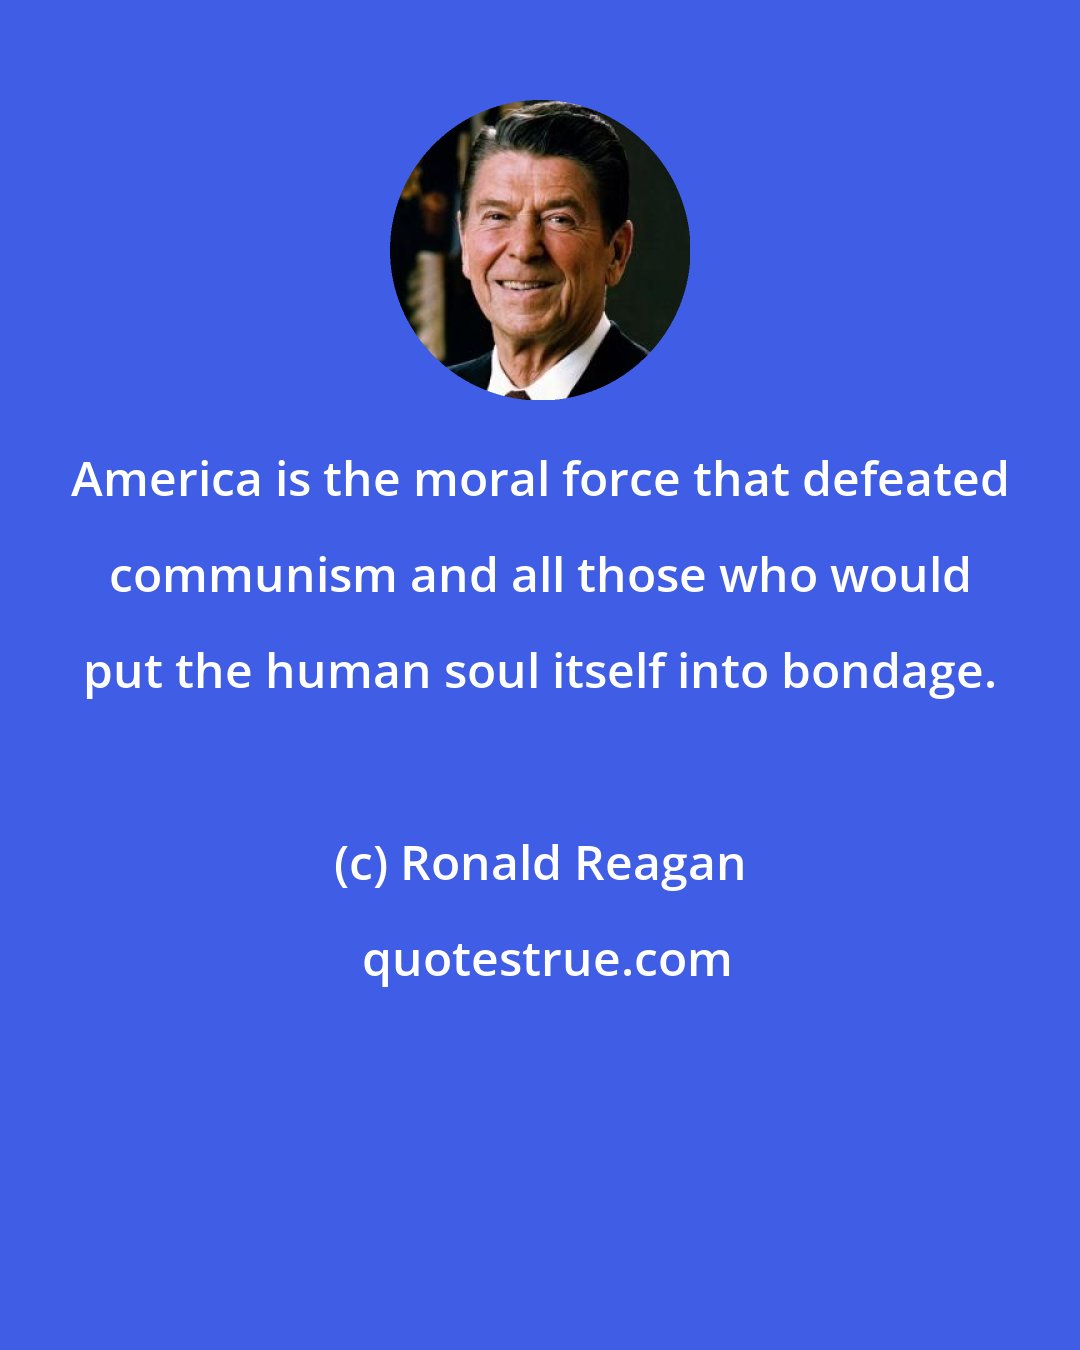 Ronald Reagan: America is the moral force that defeated communism and all those who would put the human soul itself into bondage.